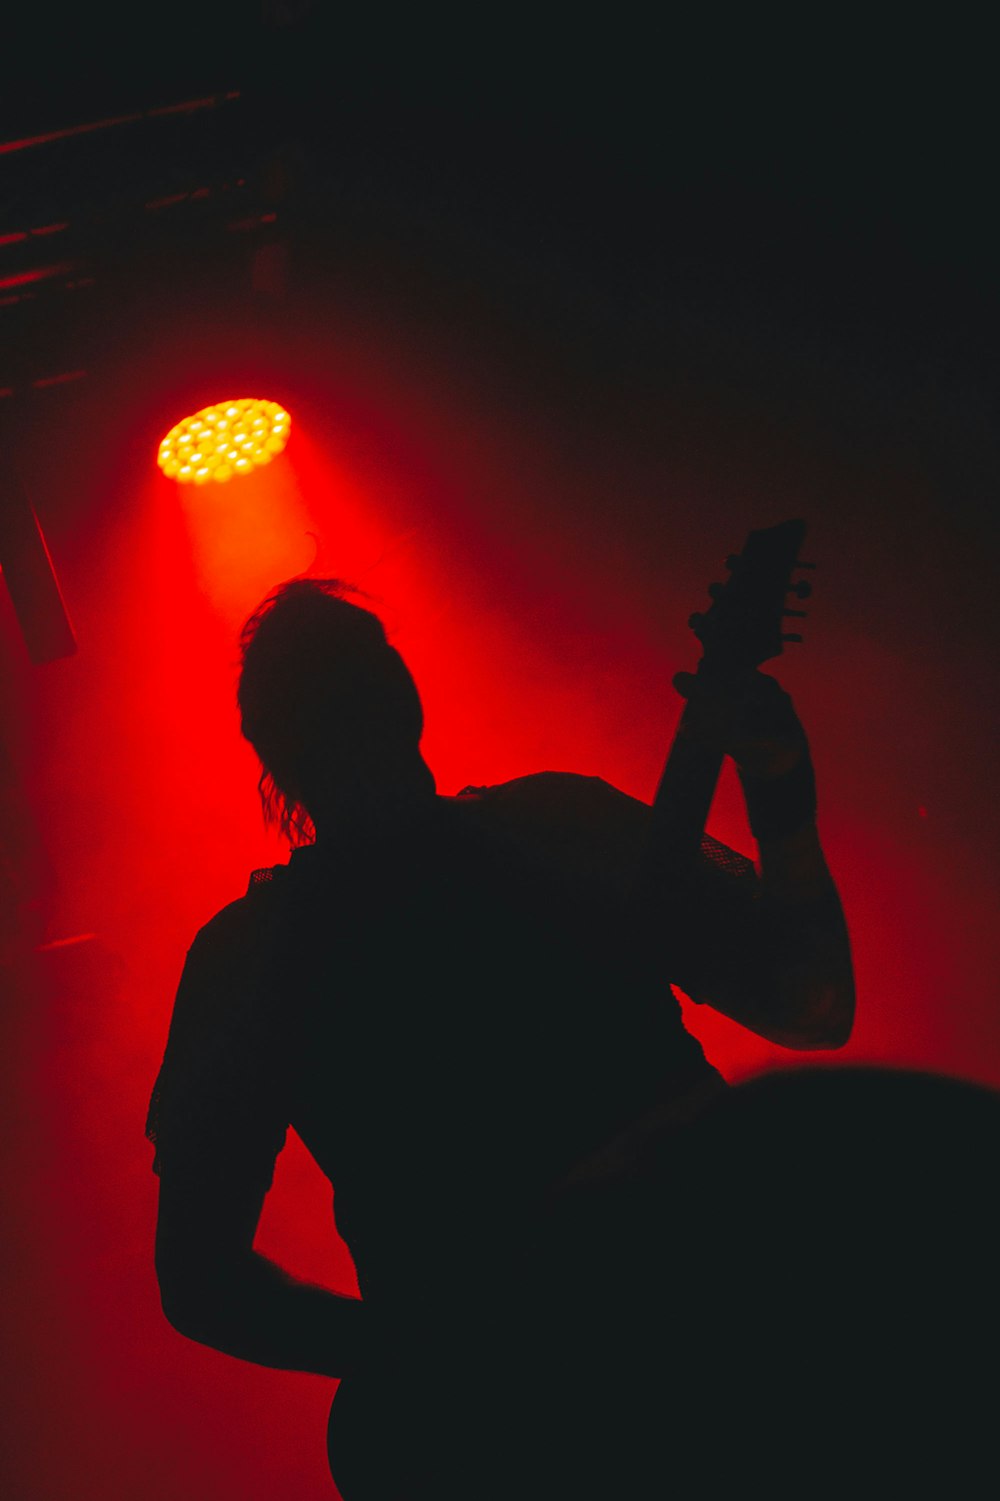 silhouette of man playing guitar